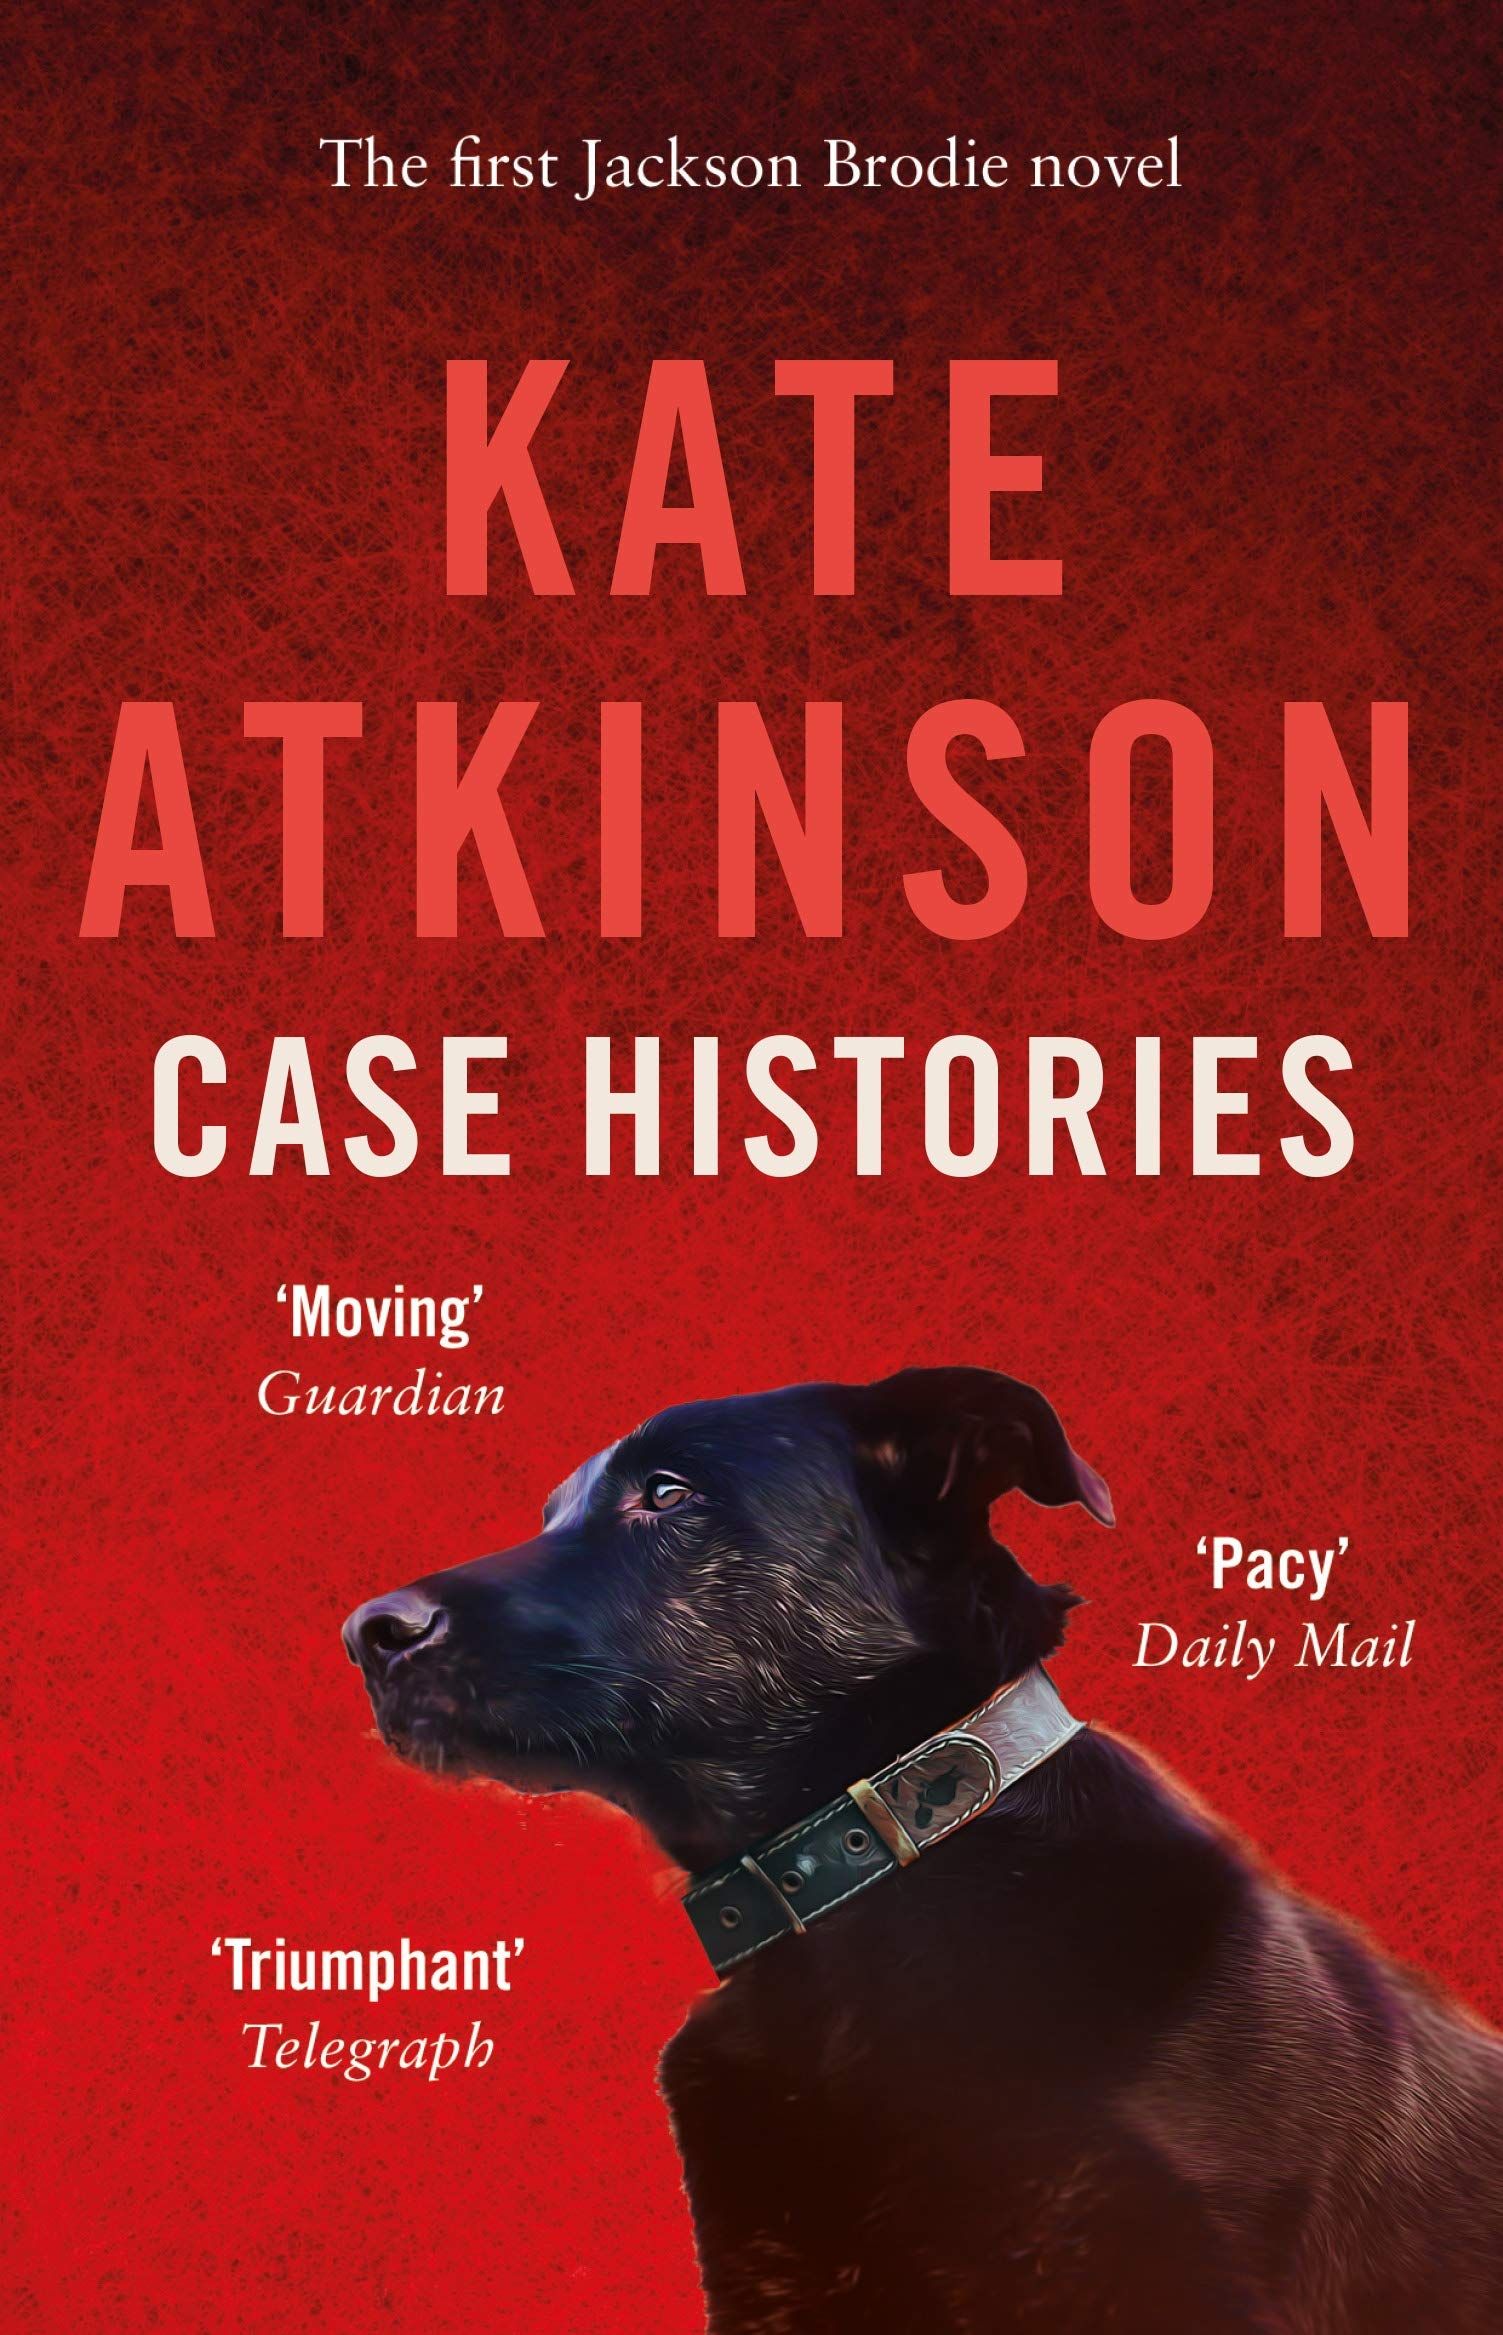 behind the scenes at the museum by kate atkinson